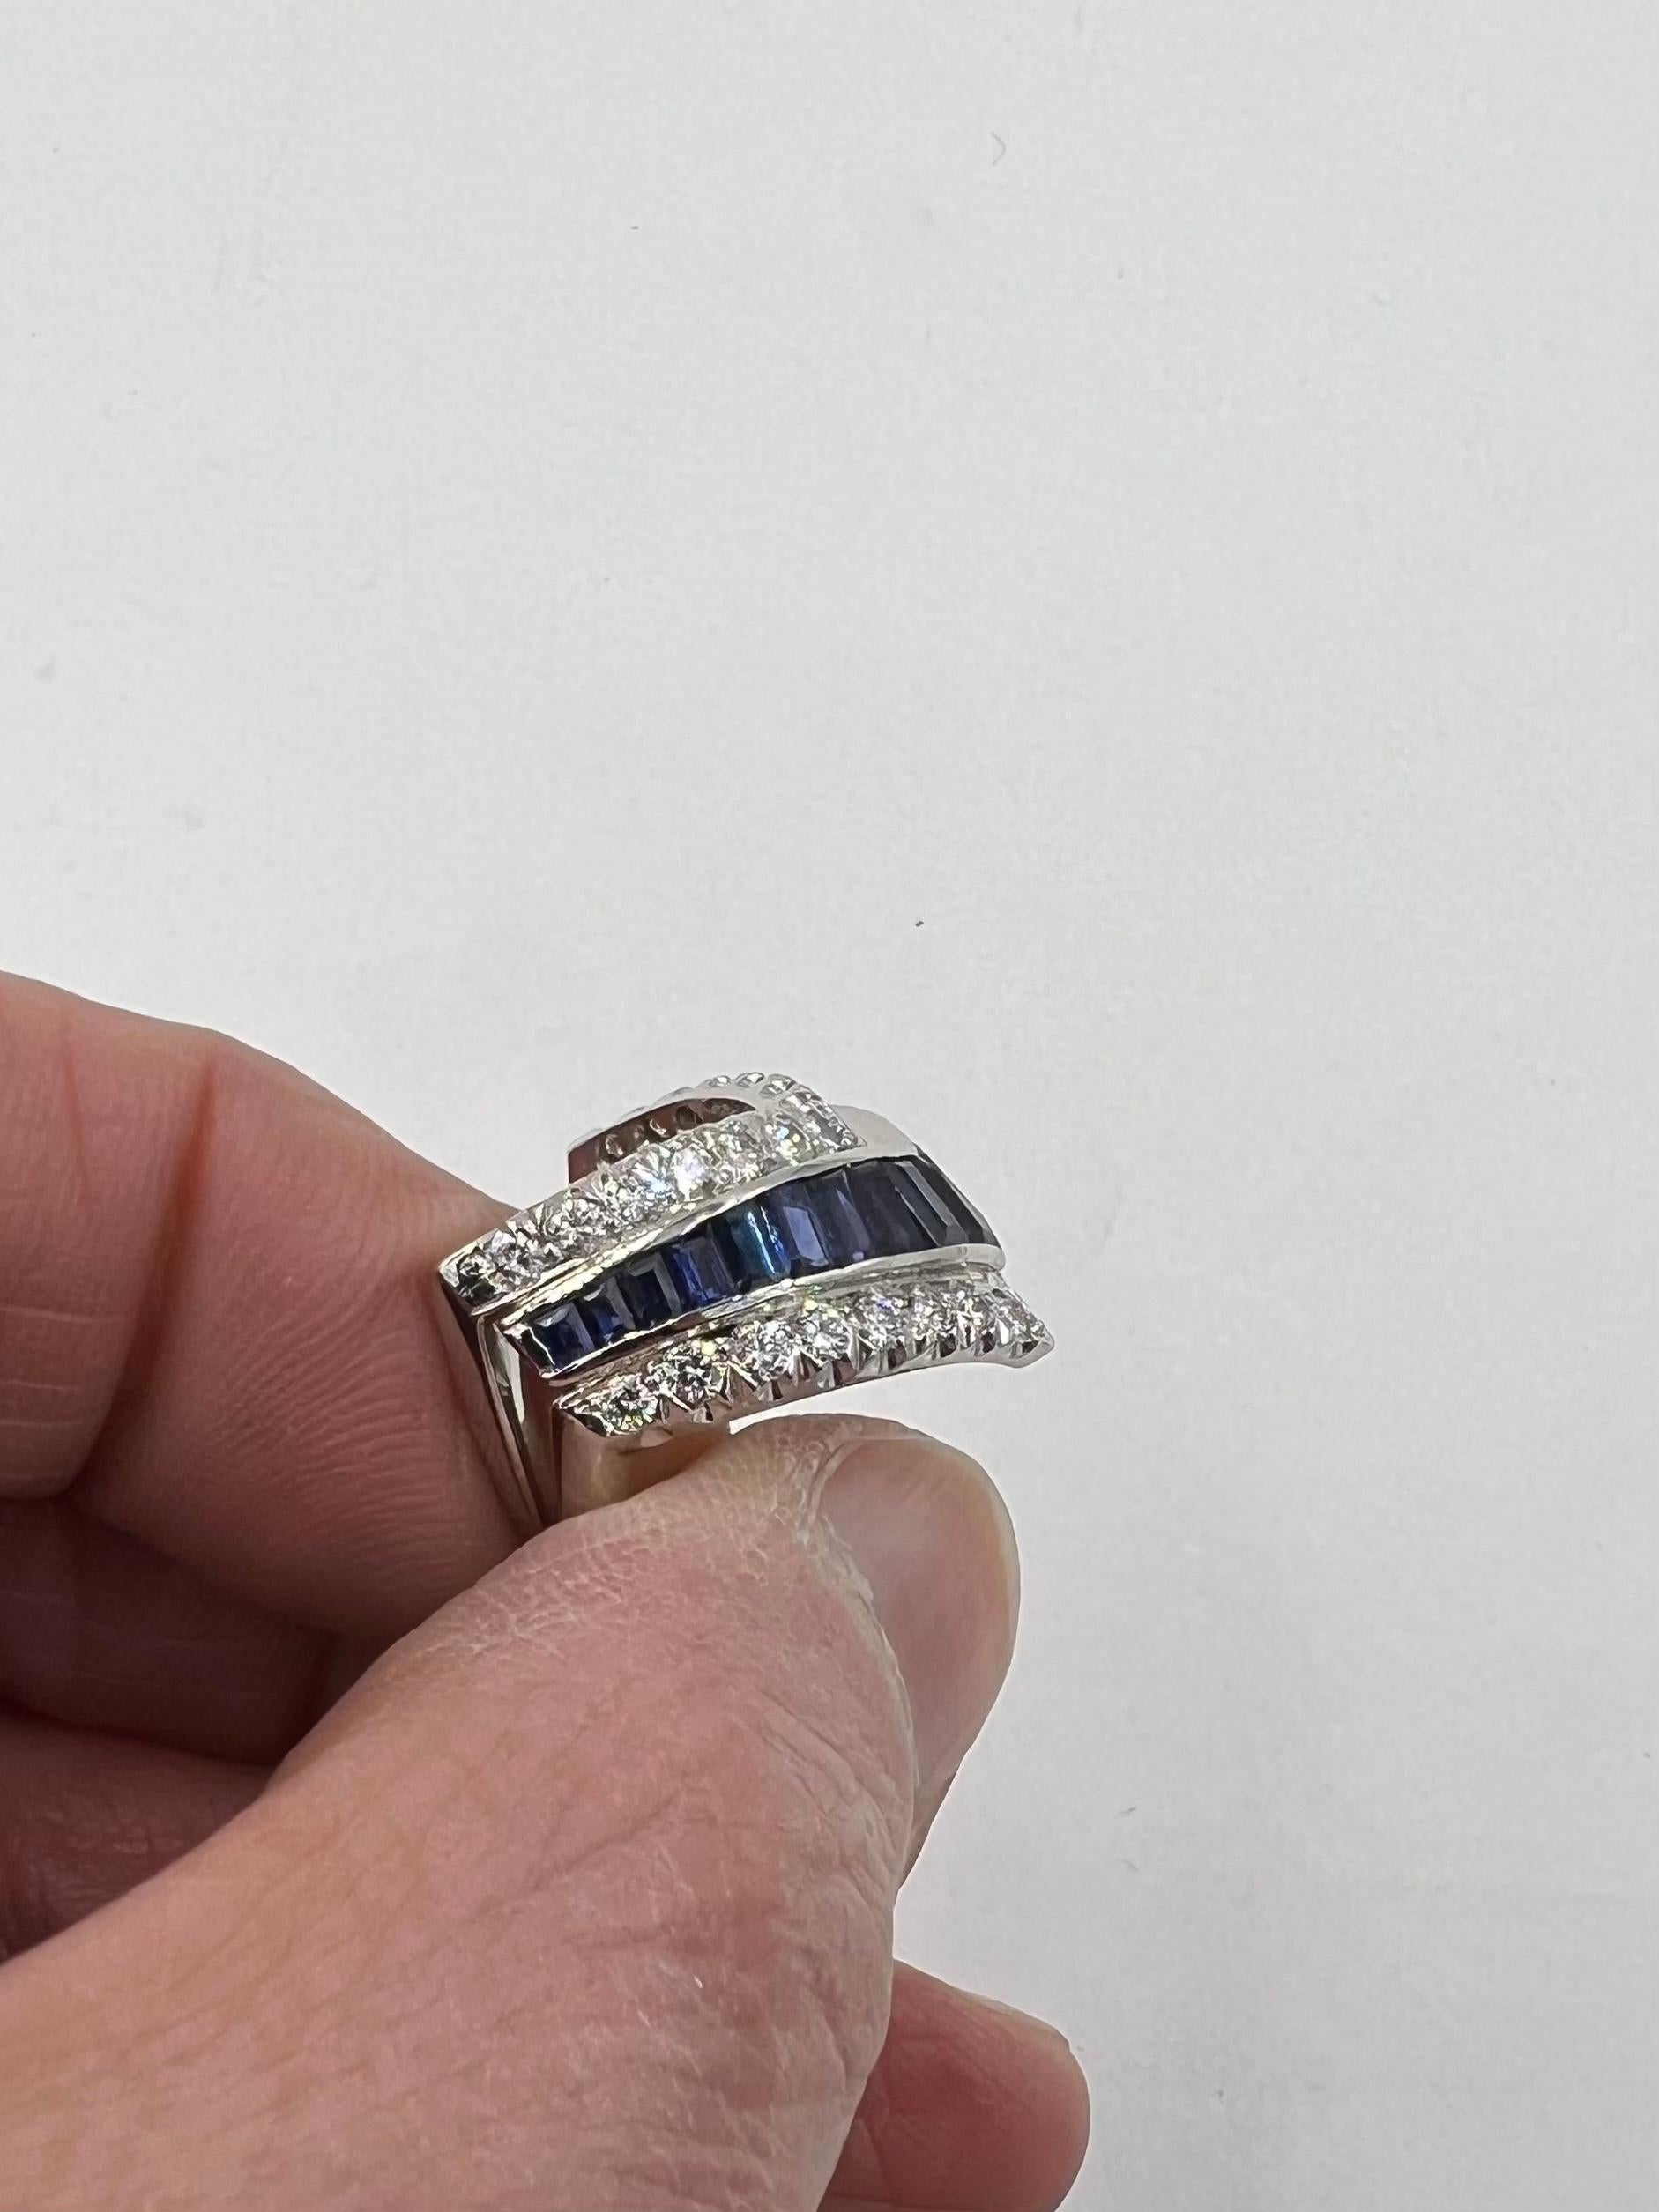 Vintage Sapphire and Diamond platinum chevron band ring circa 1950

ABOUT THIS ITEM:  R-DJ310H

           A very unusual vintage chevron ring with calibrated cut Sapphires and two rows of round brilliant cut diamonds, one on each side of the